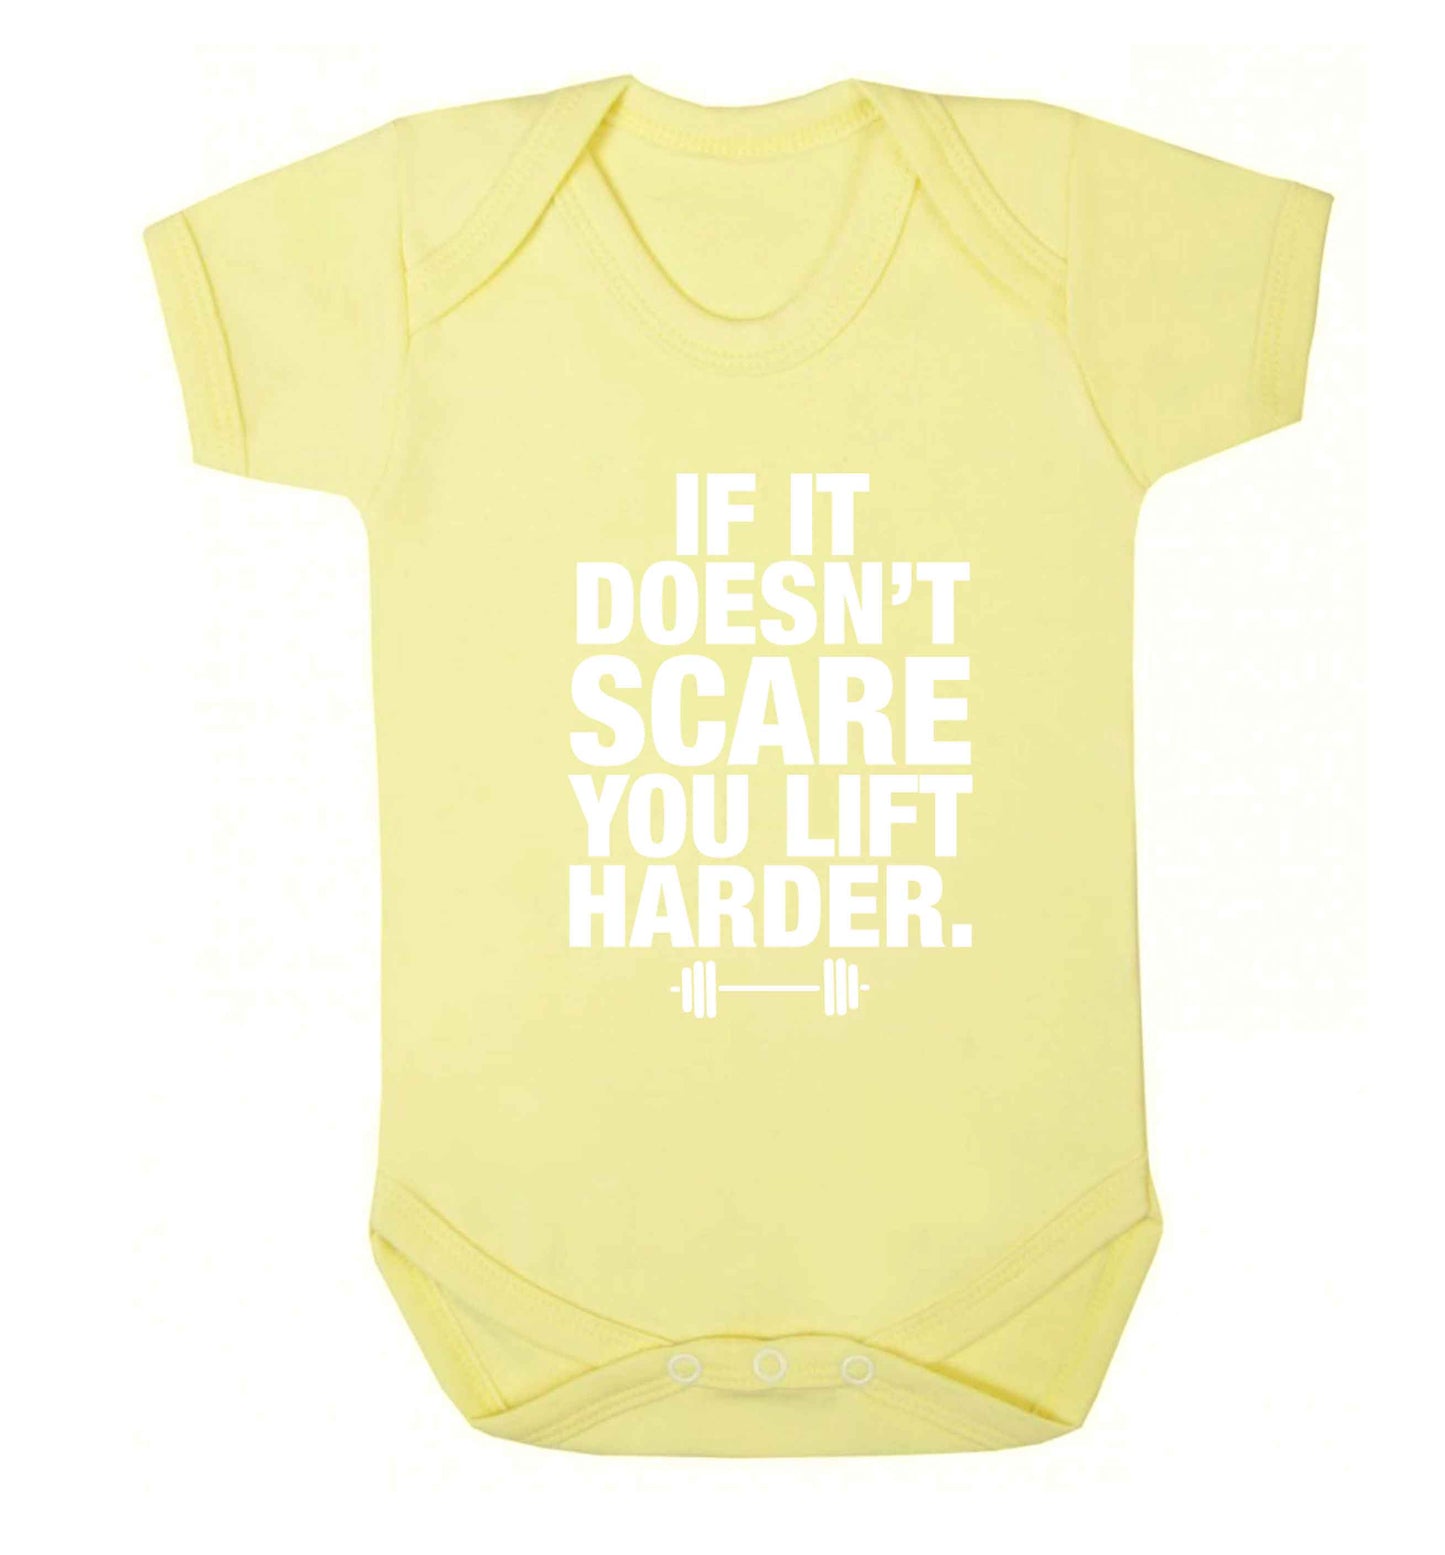 If it doesnt' scare you lift harder Baby Vest pale yellow 18-24 months